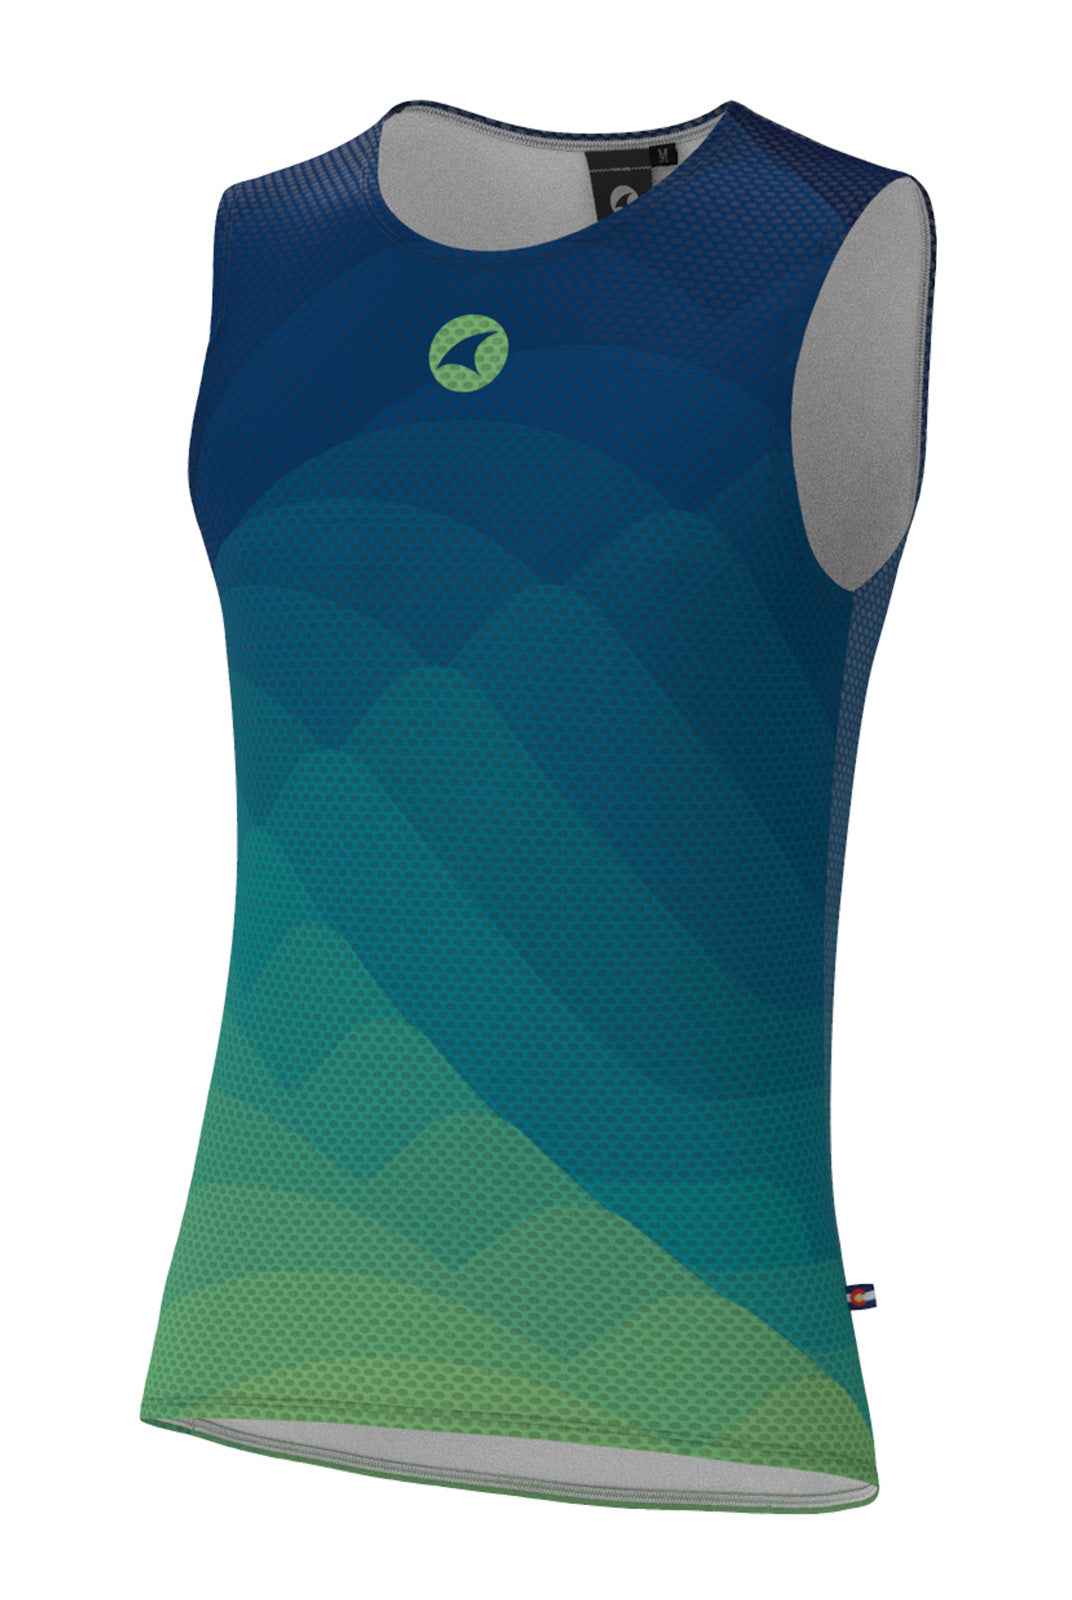 Men's PAC Sleeveless Base Layer - Twighlight Front View